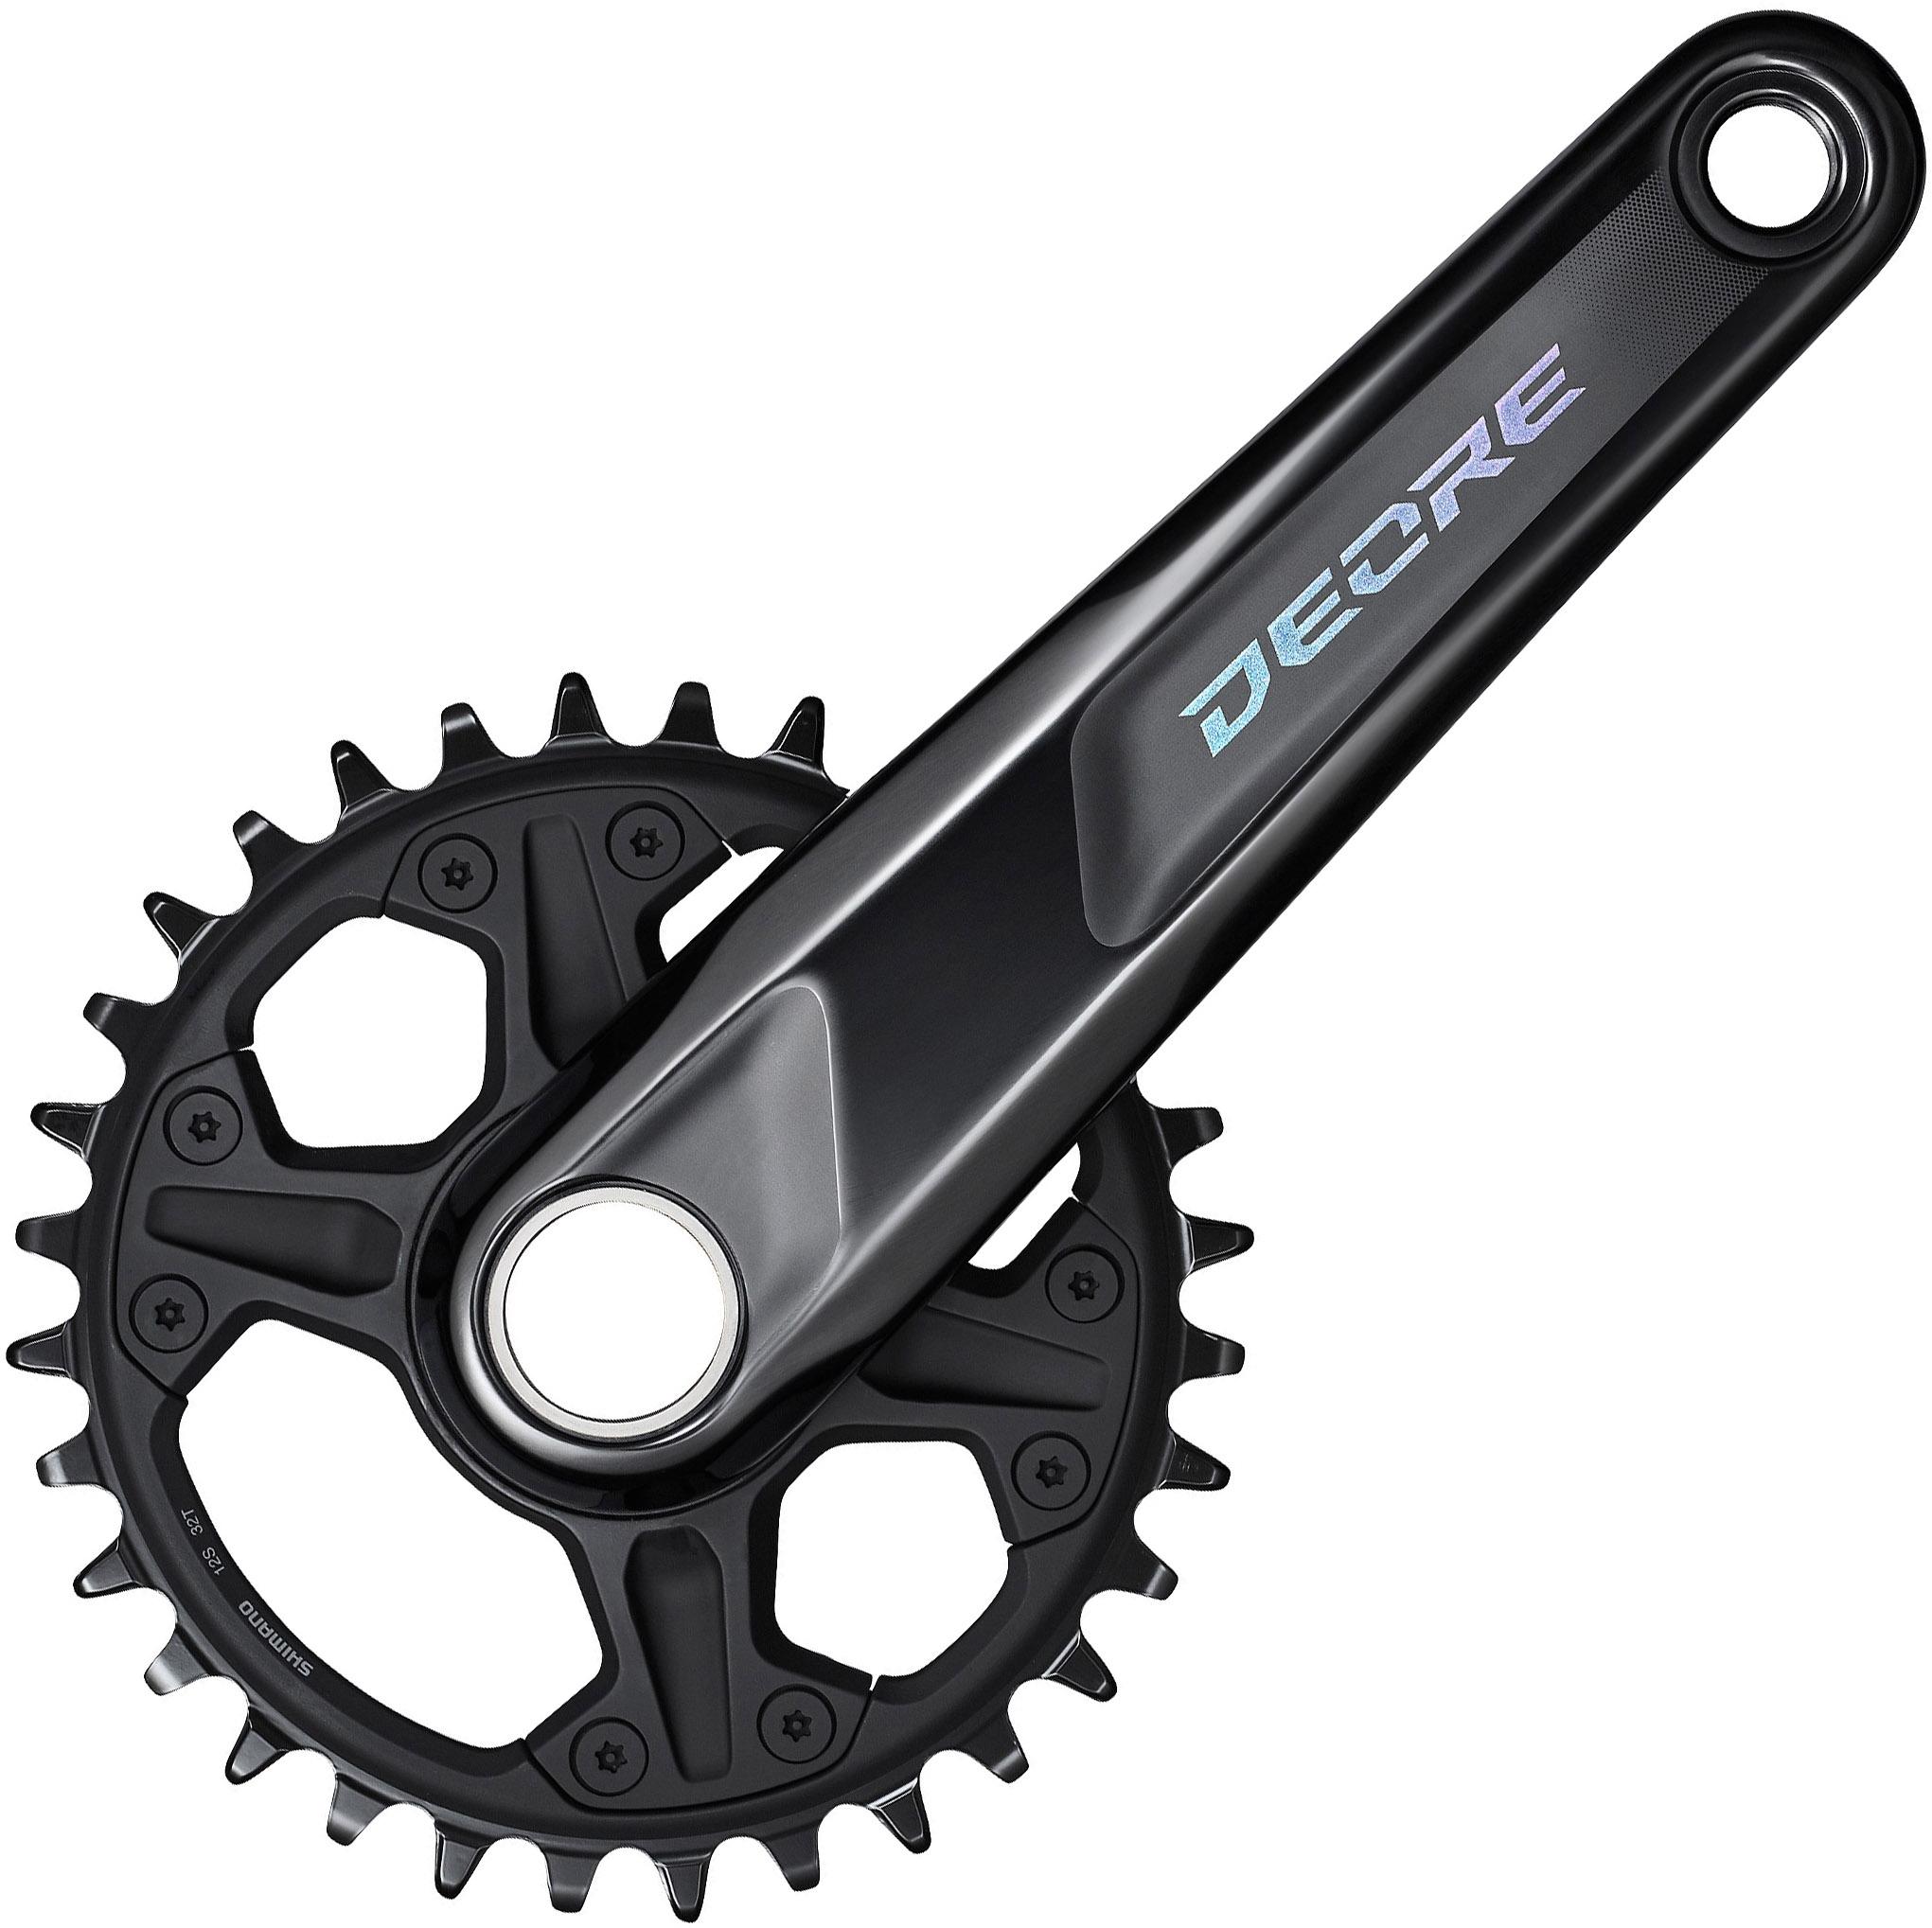 Shimano M6100 Deore 12 Speed Single Chainset - Black